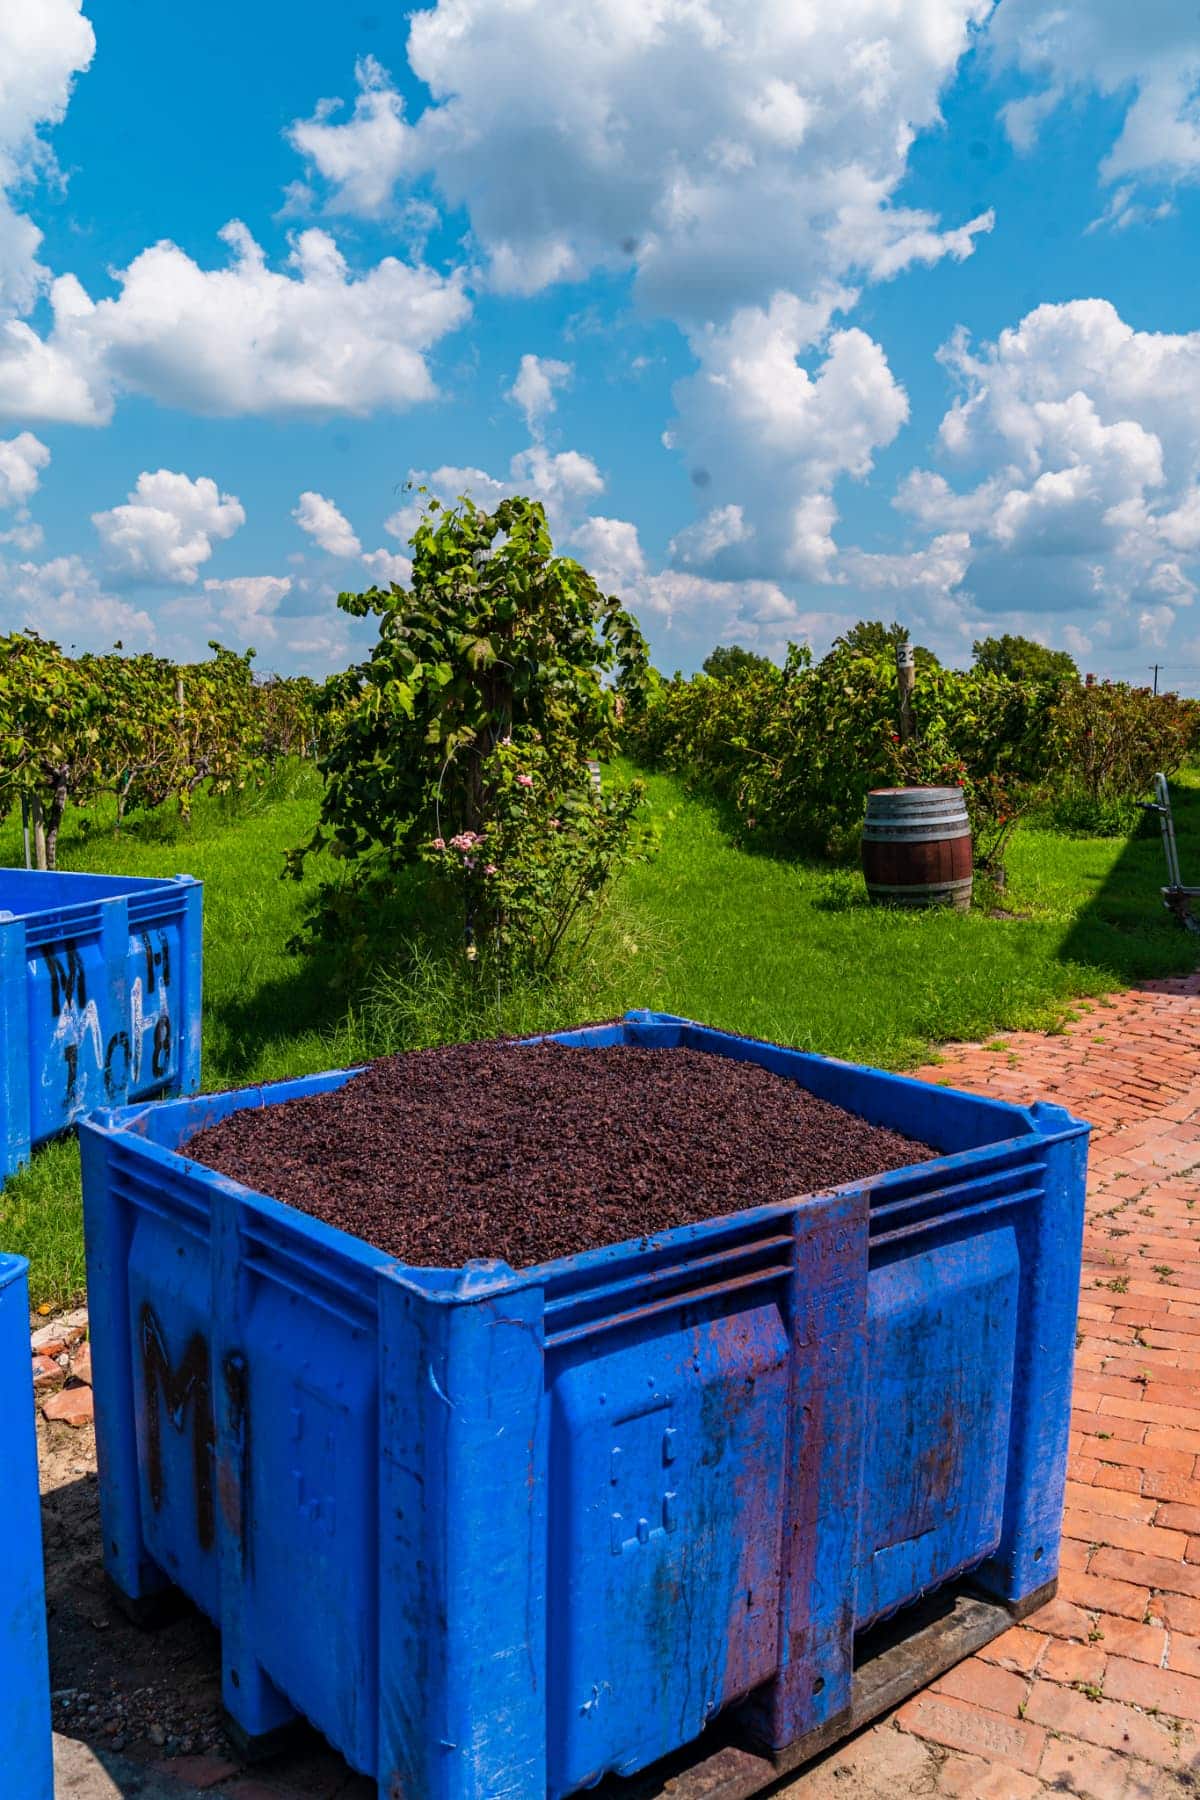 Huge blue bin full of grapes with the vineyard in the background